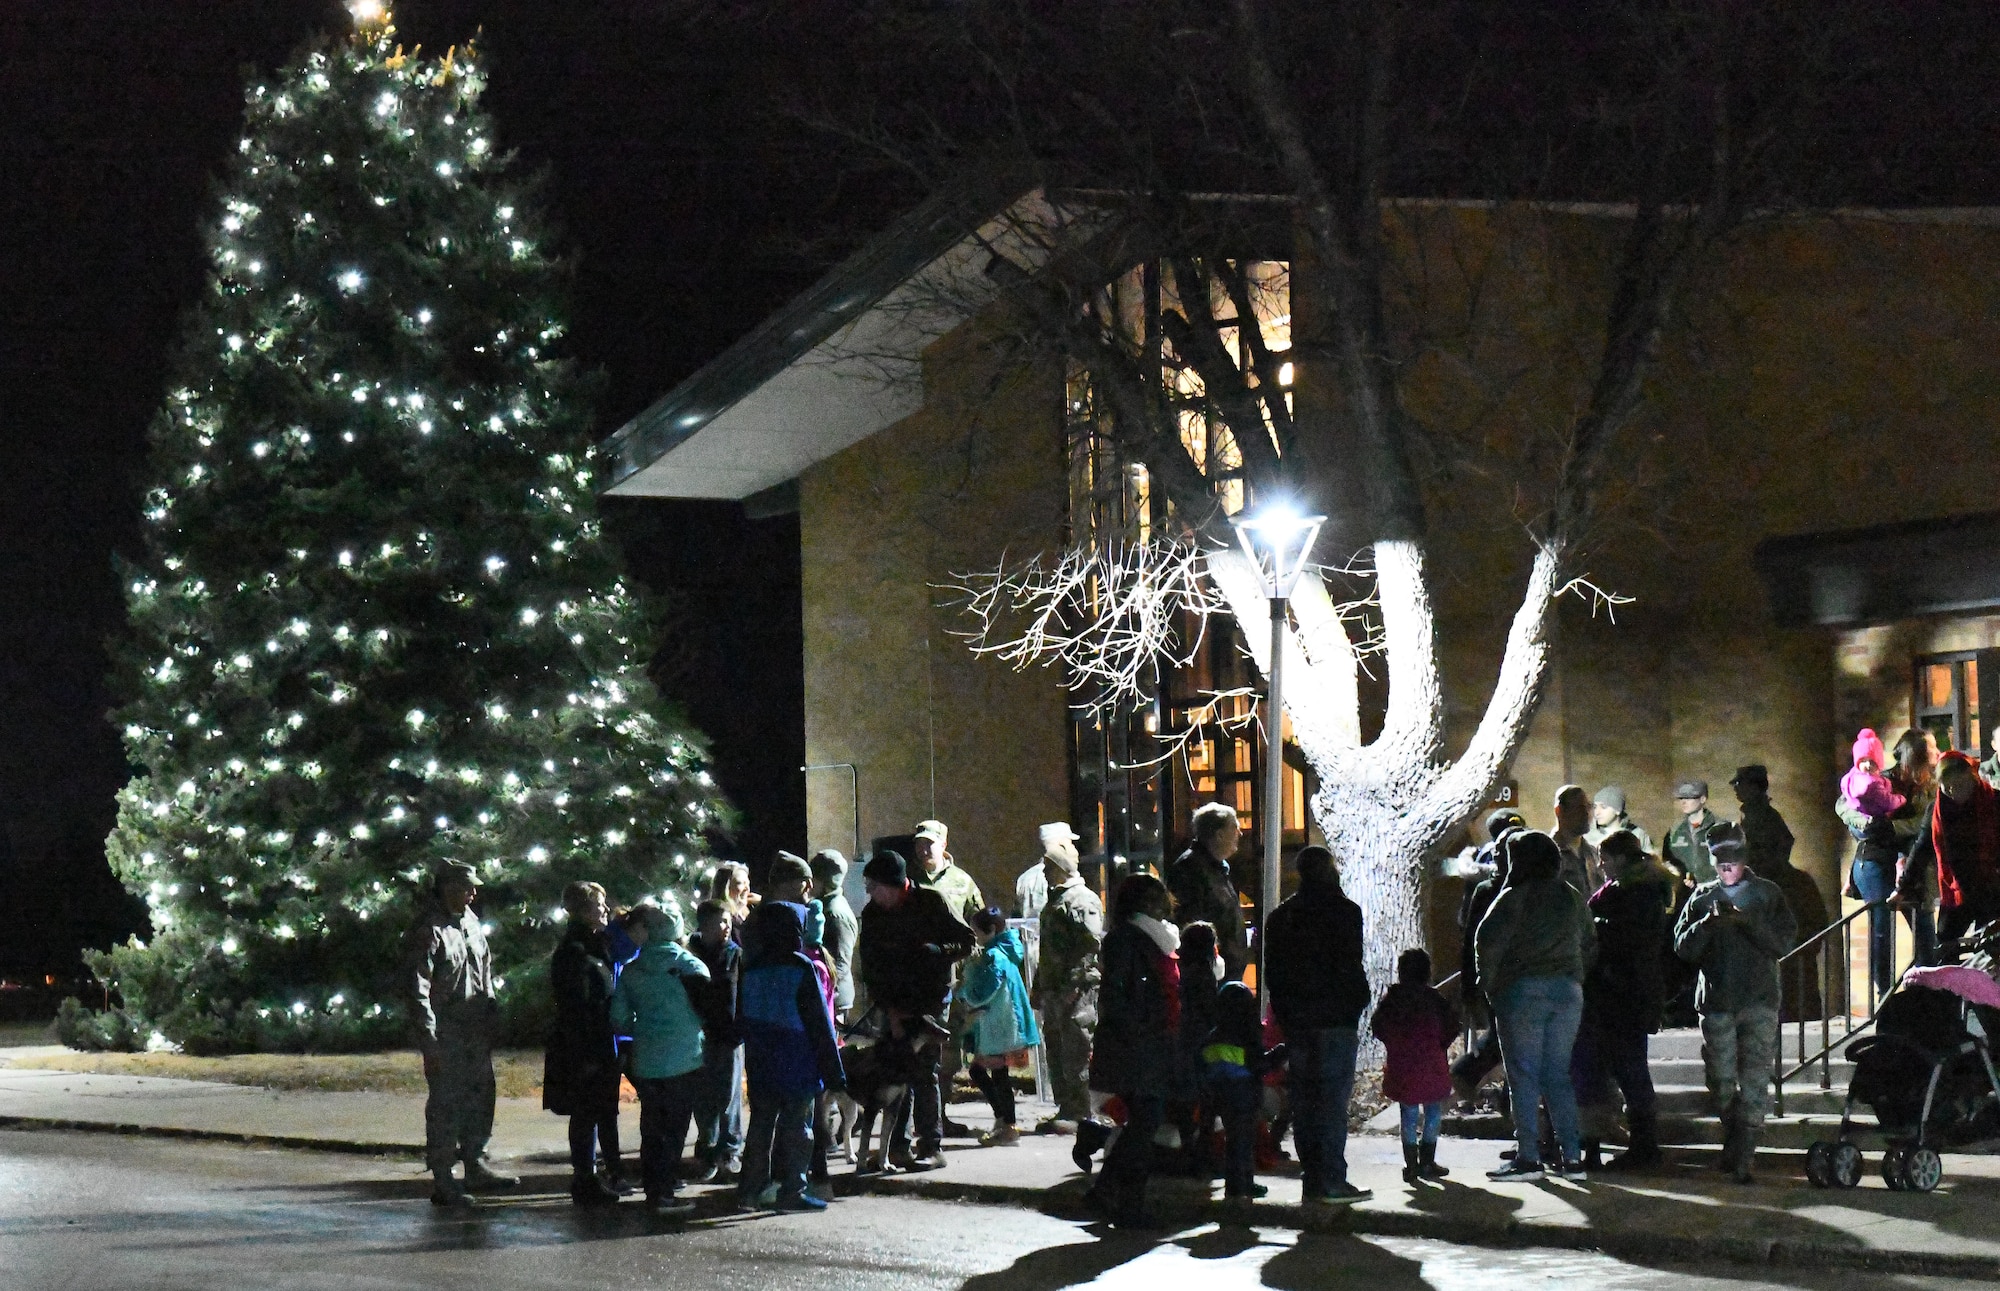 Members of the 28th Bomb Wing gather for a tree lighting ceremony at the Freedom Chapel on Ellsworth Air Force Base, S.D., Nov. 30, 2018. Airmen and their families came out to celebrate the lighting of the base tree and to start the holidays in a festive and family-friendly environment where multiple religions were represented. (U.S. Air Force photo by Airman 1st Class Thomas Karol)